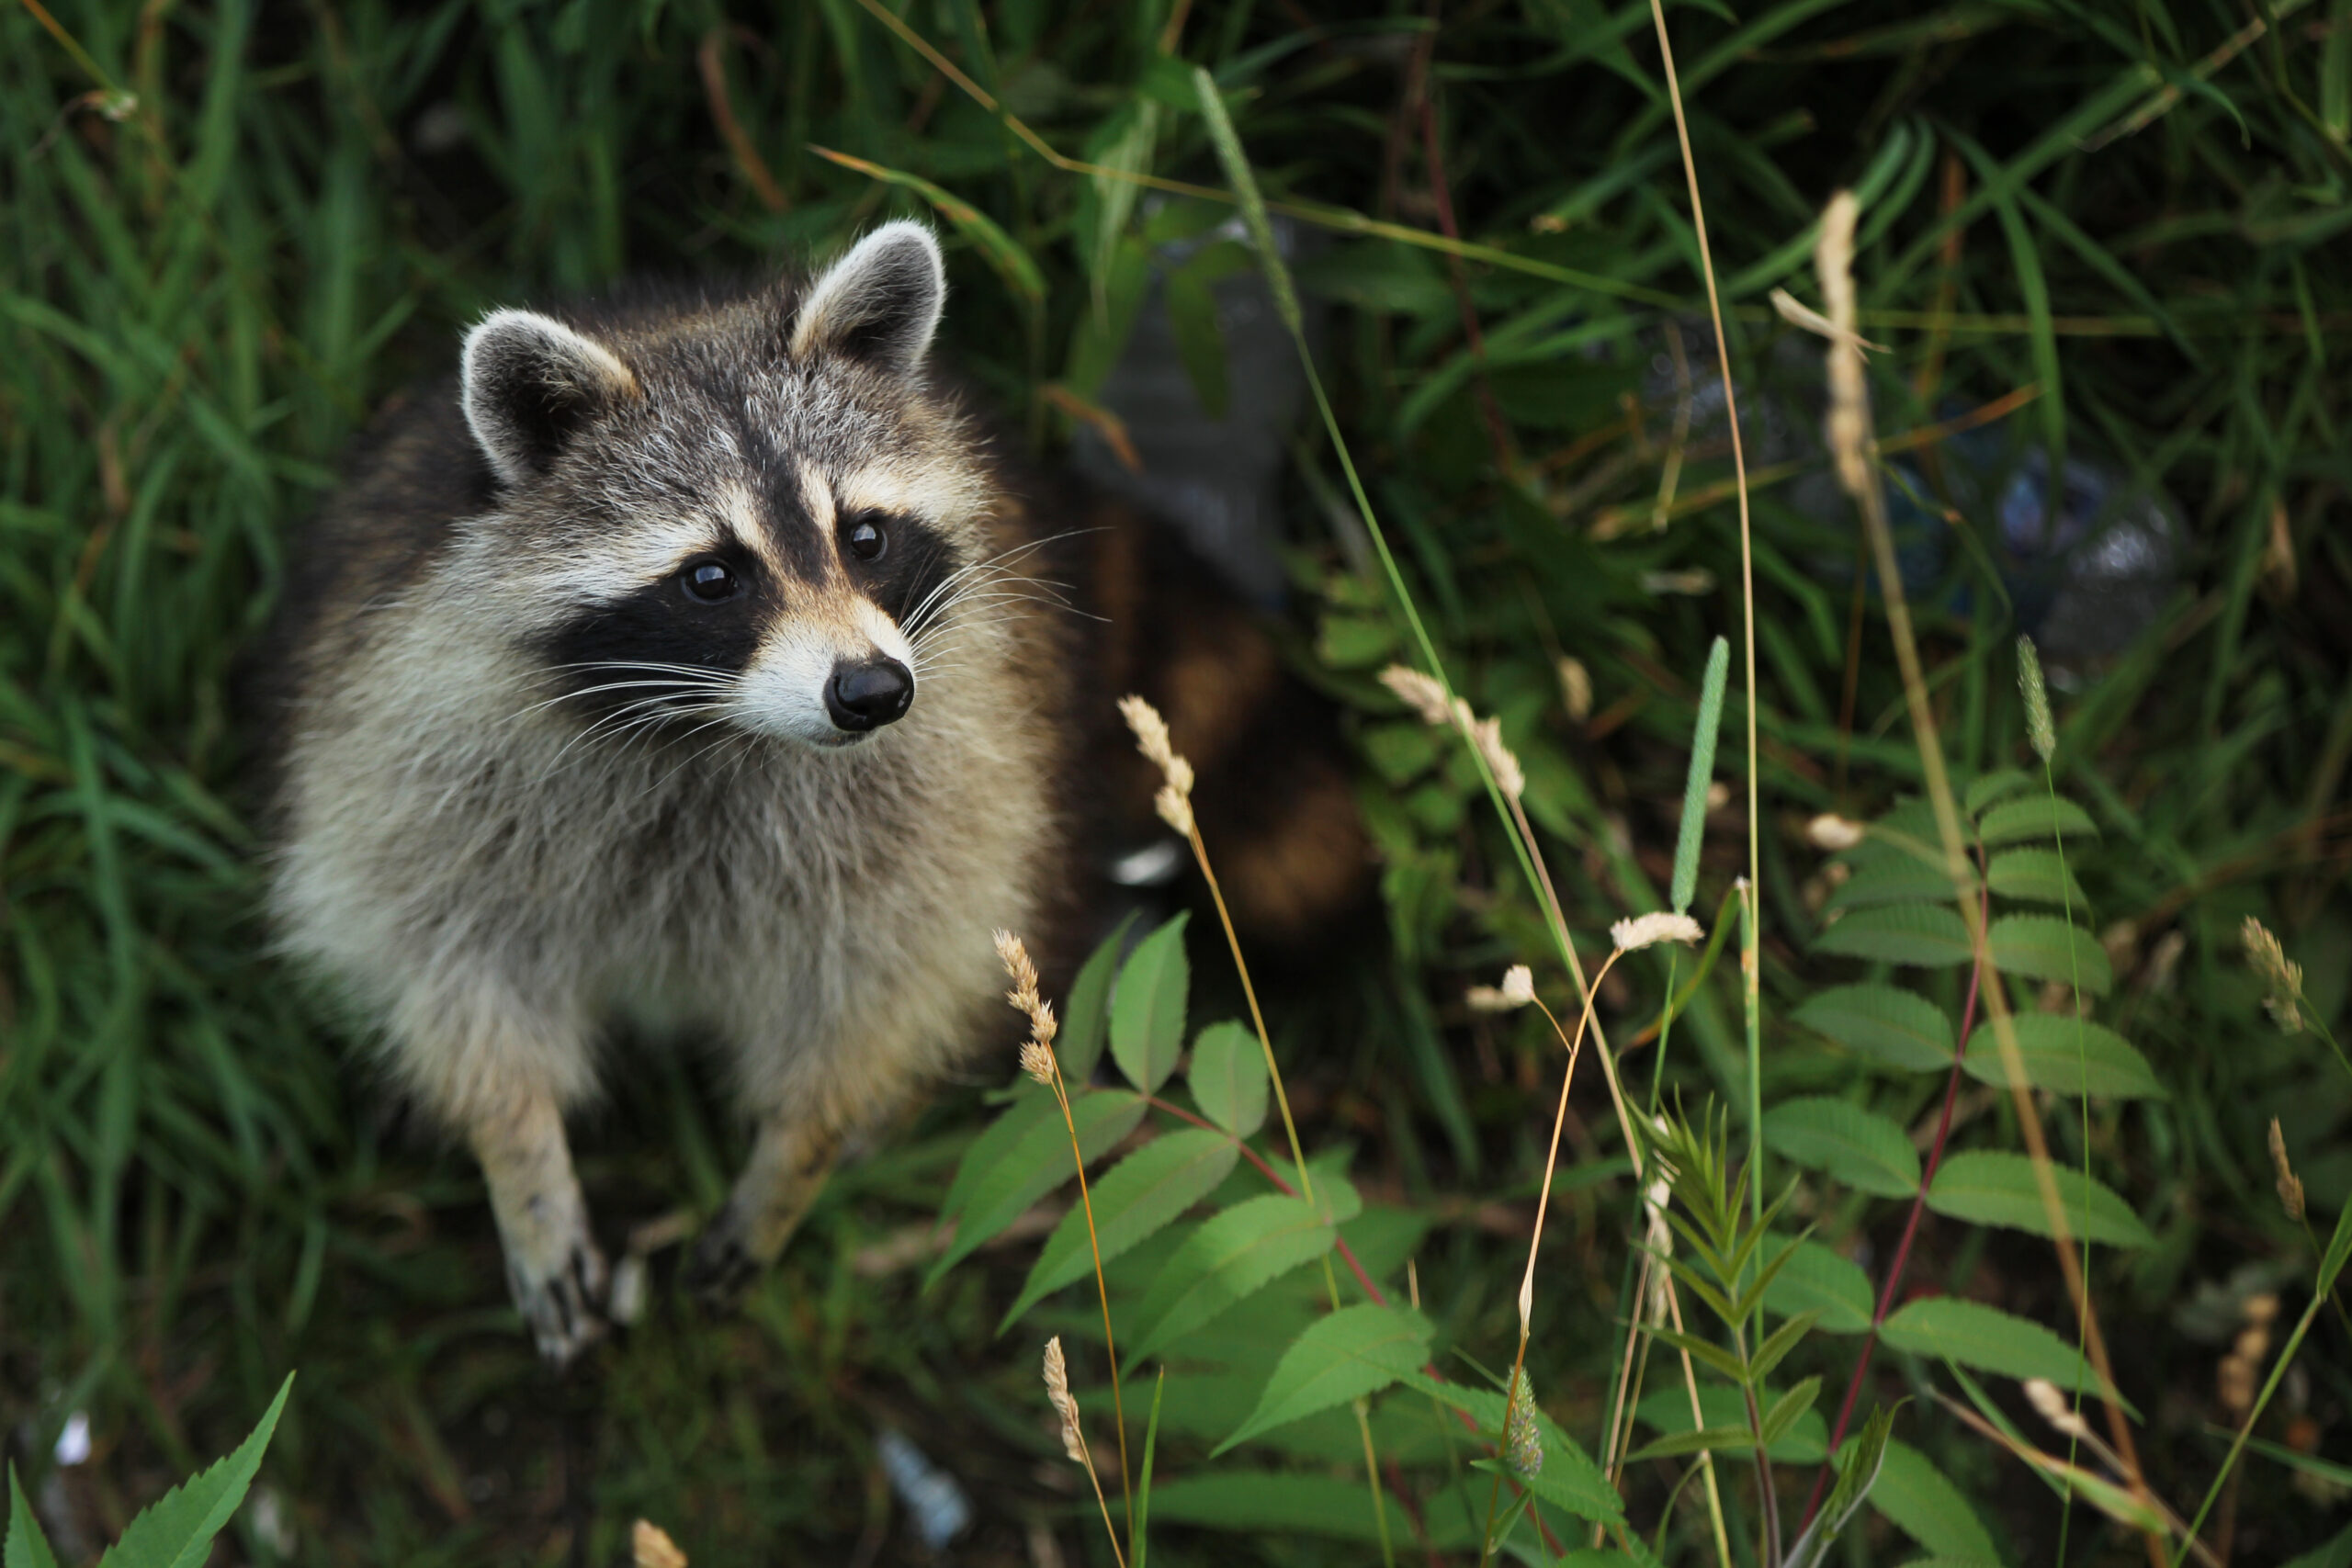 In the United States, certain pockets of animals act as rabies' “viral reservoirs”, where the disease continues to travel through populations of those animals, keeping the virus constantly active. In the U.S., those animals include raccoons, skunks, foxes, and coyotes.